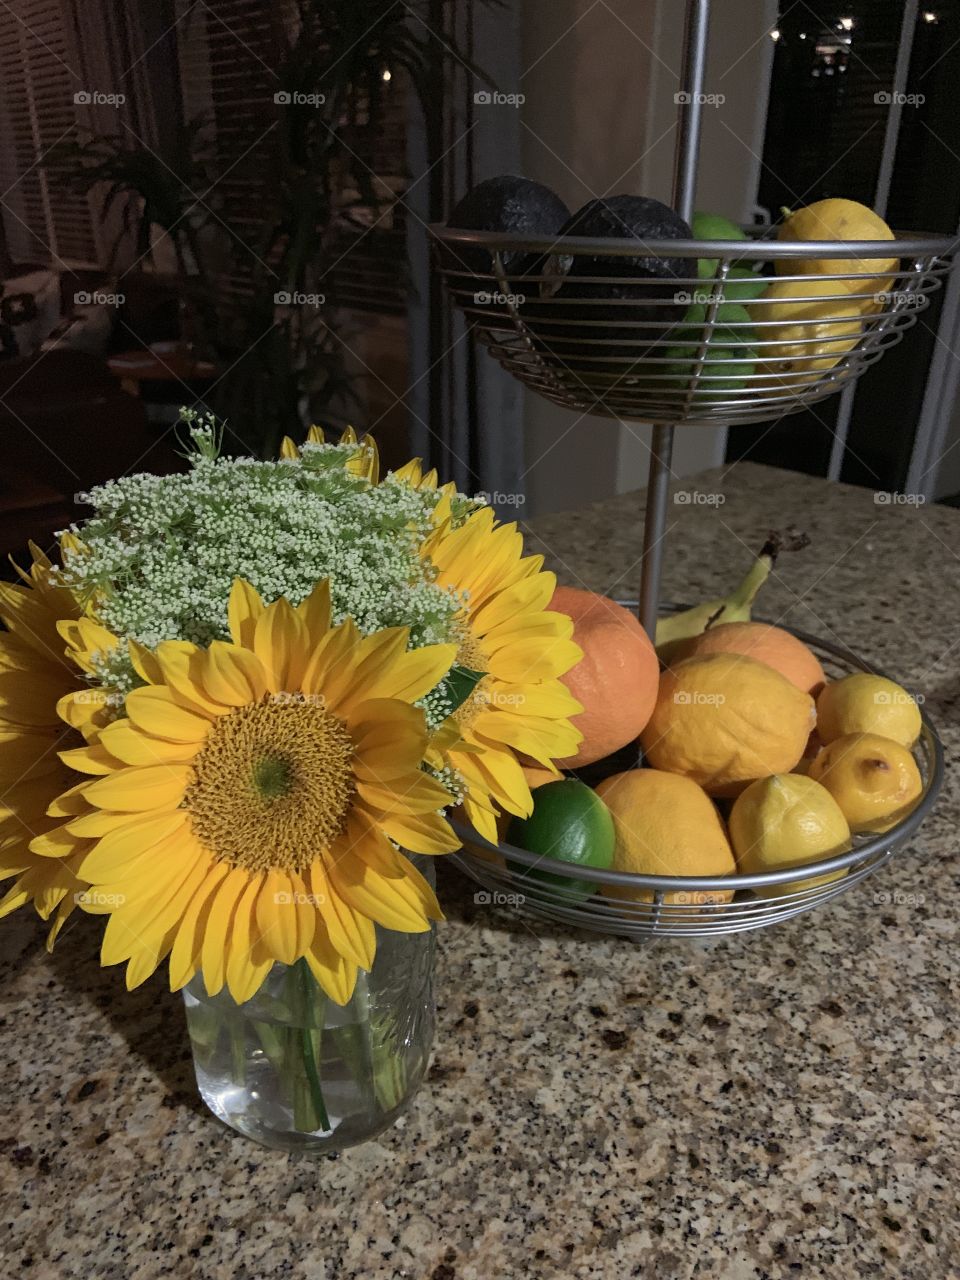 Flowers and fruit bowl